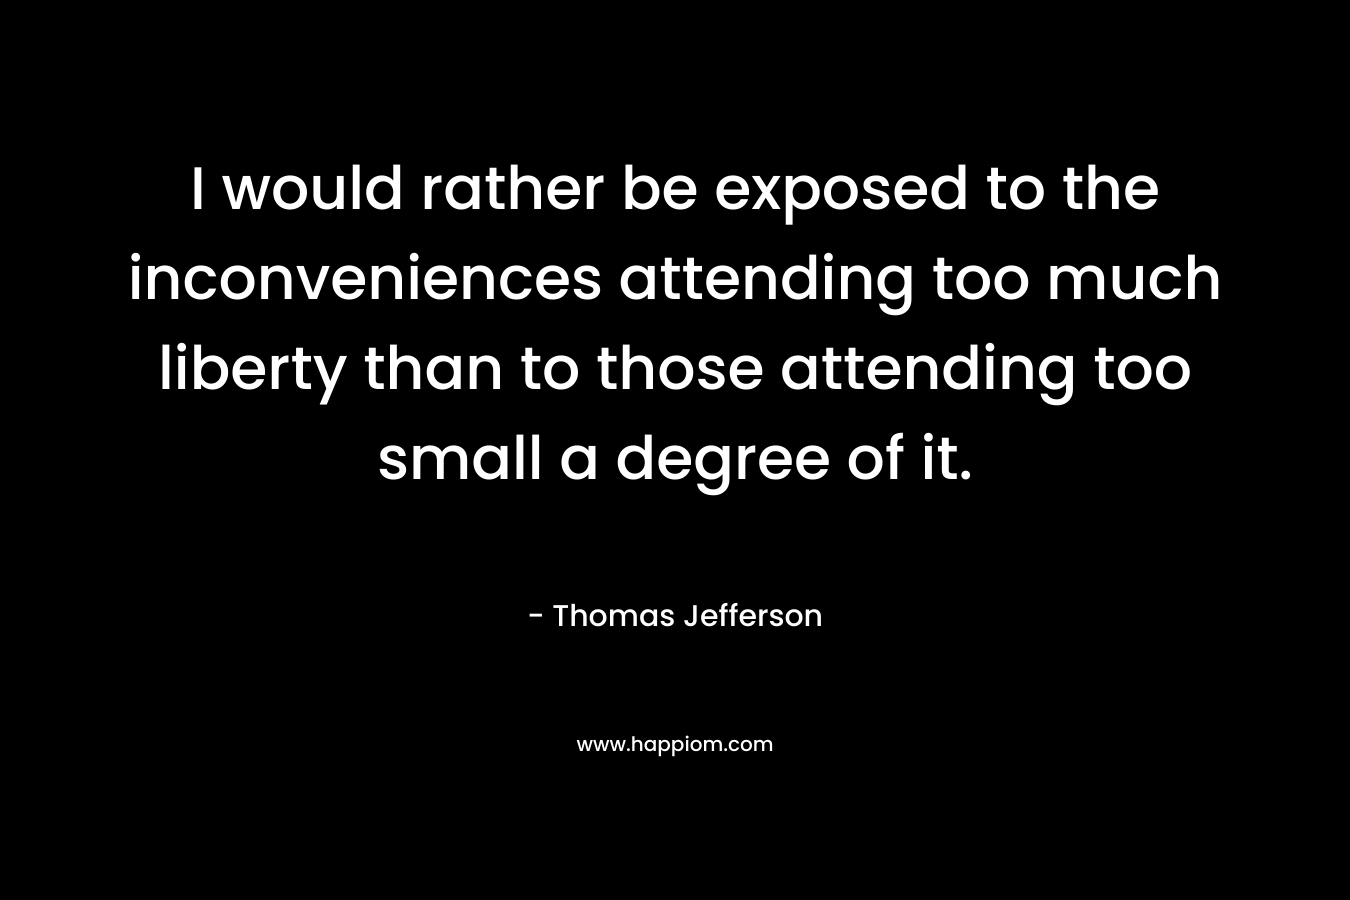 I would rather be exposed to the inconveniences attending too much liberty than to those attending too small a degree of it.